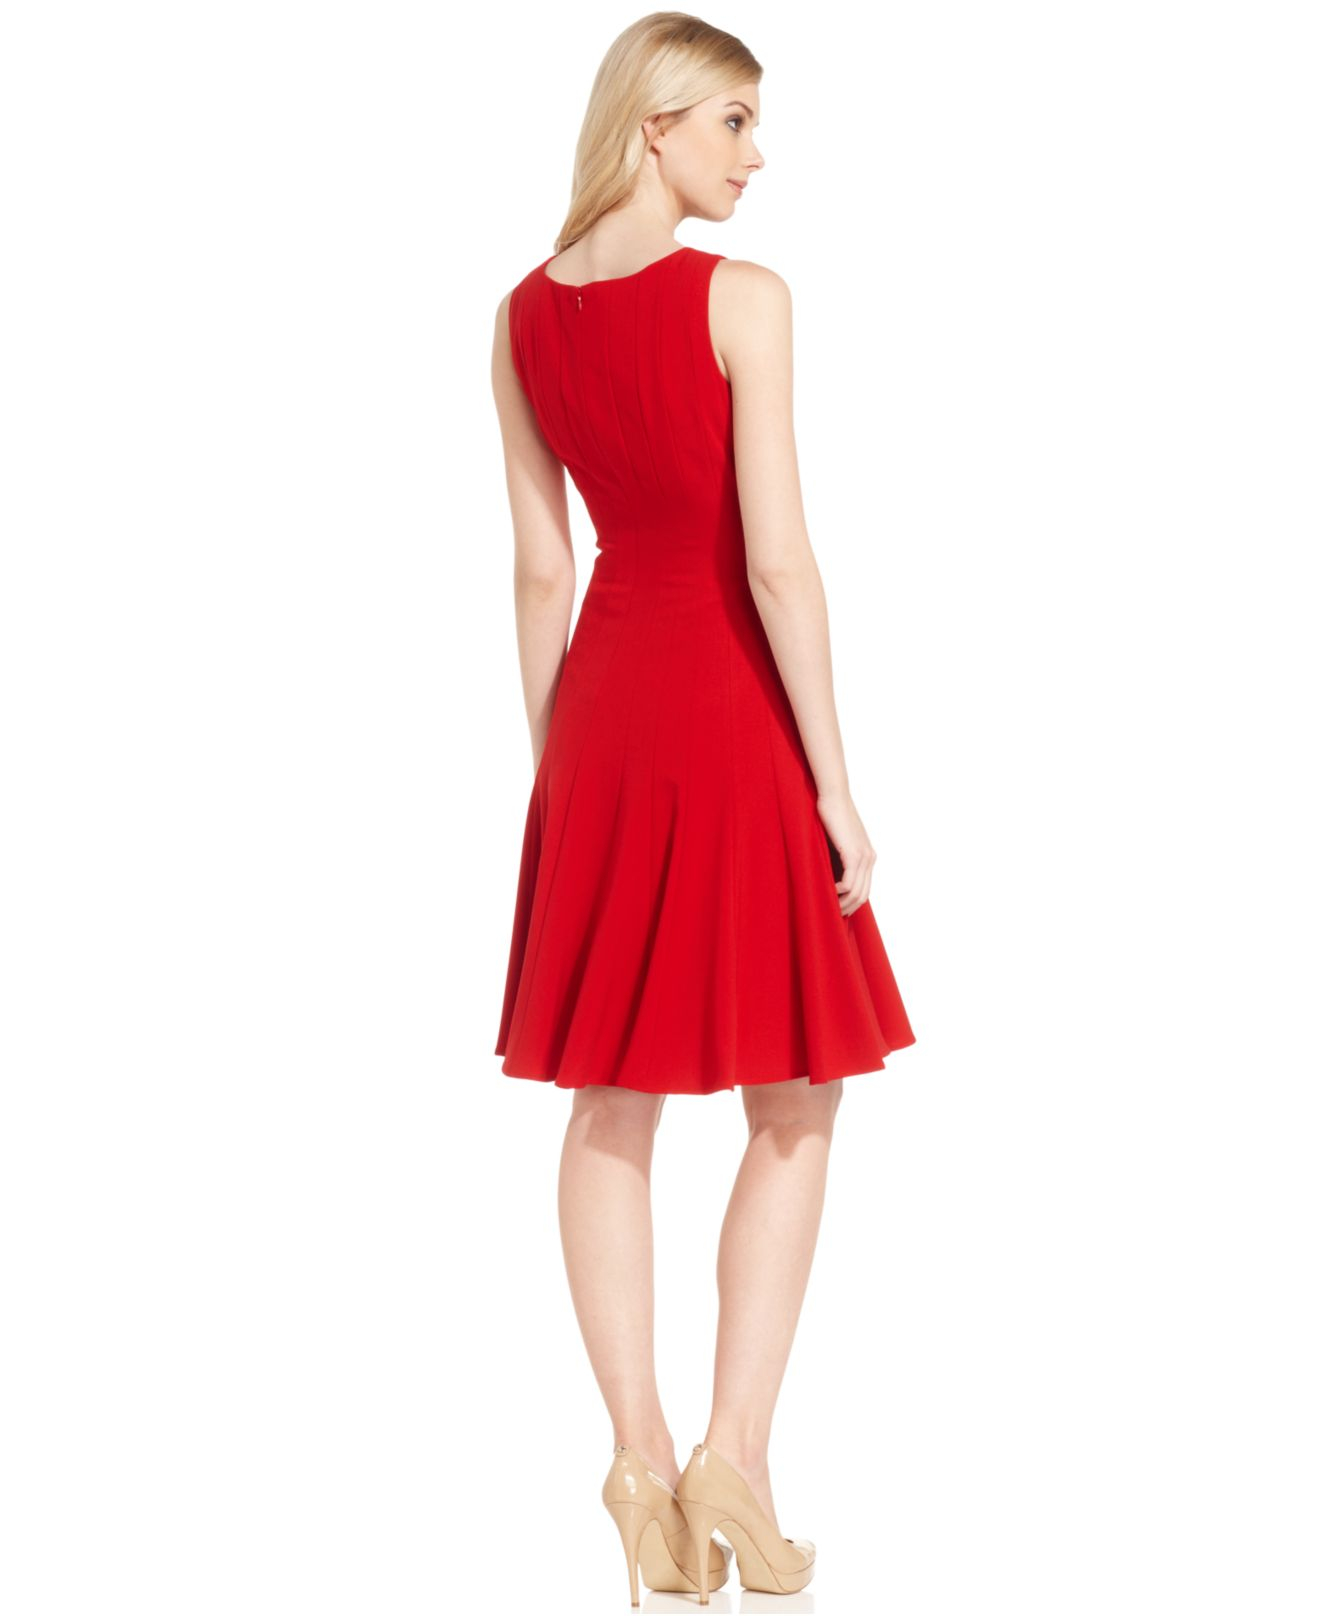 Lyst - Calvin klein Sleeveless Pleated A-line Dress in Red